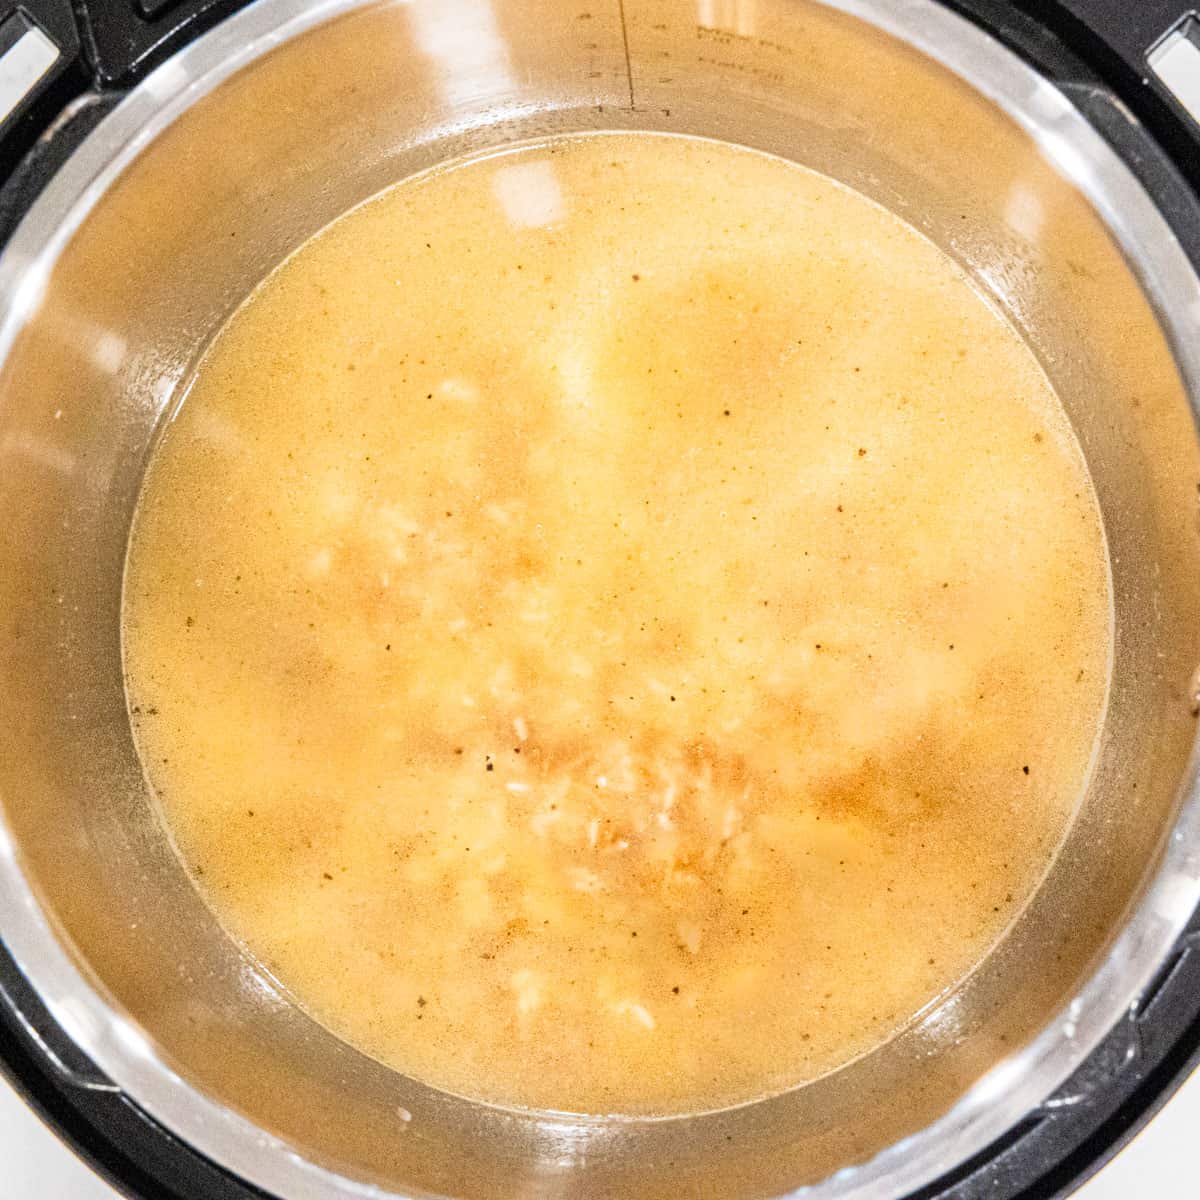 Chicken broth and rice in an Instant Pot before cooking the rice.